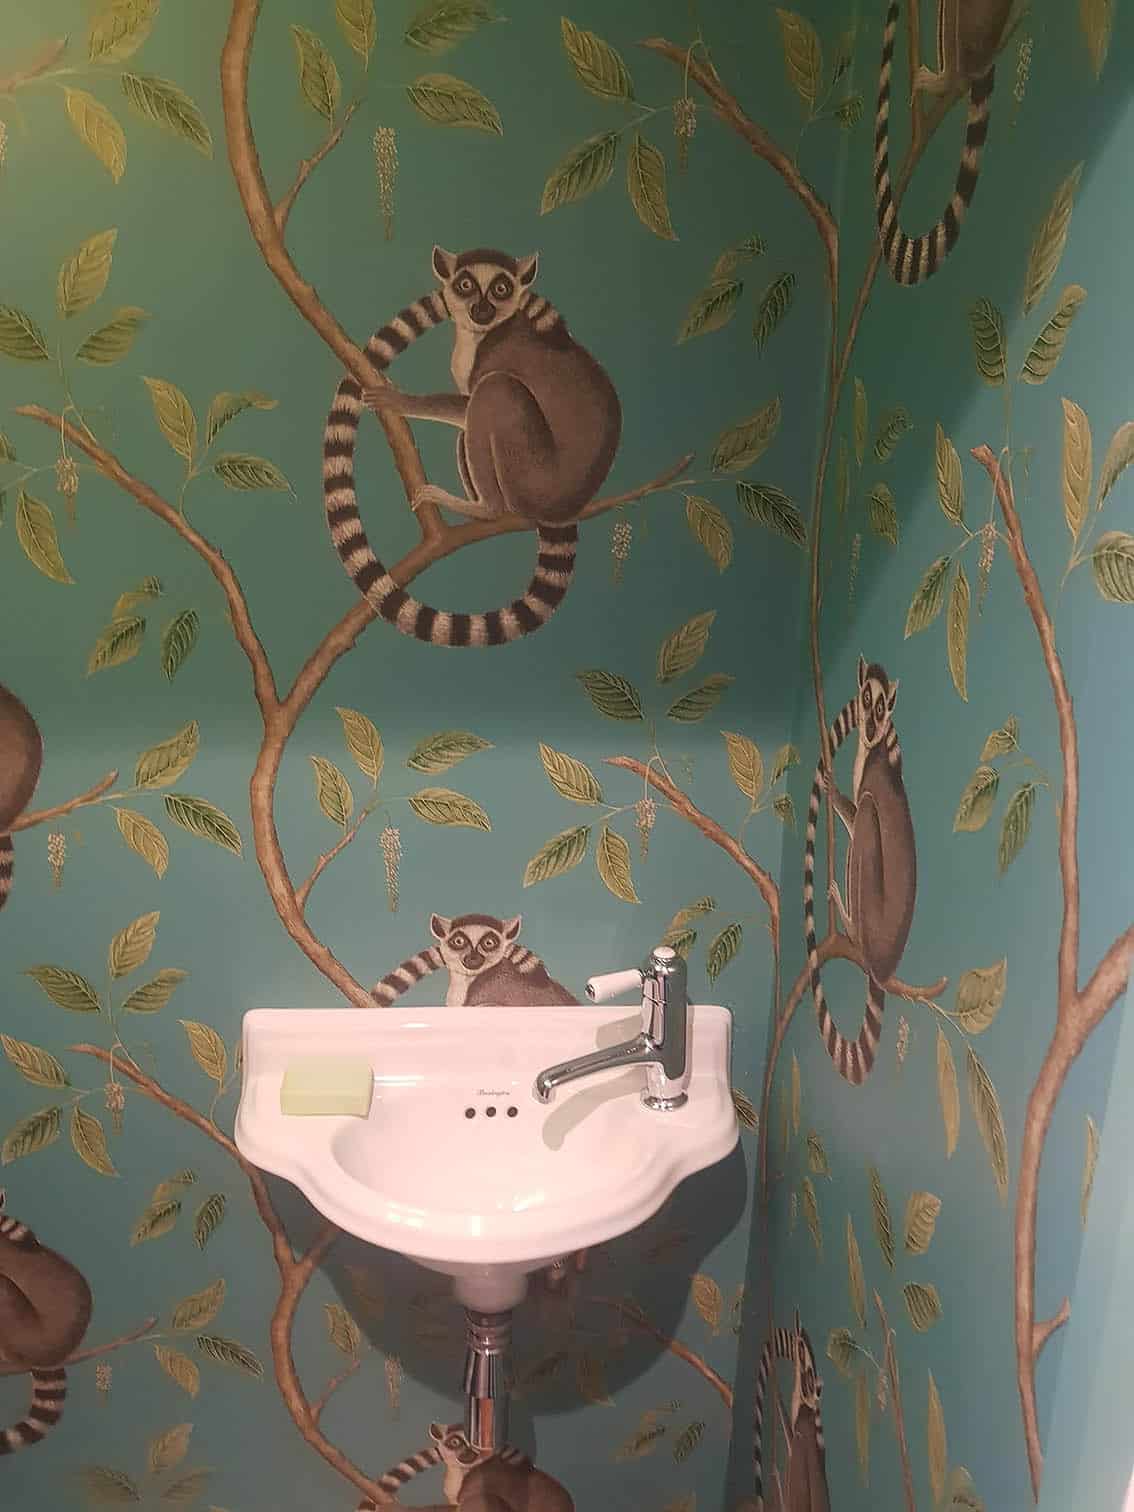 Sanderson Ringtailed Lemurs wallpaper professionally installed in a bathroom. Wallpaper has green background and animated lemurs .